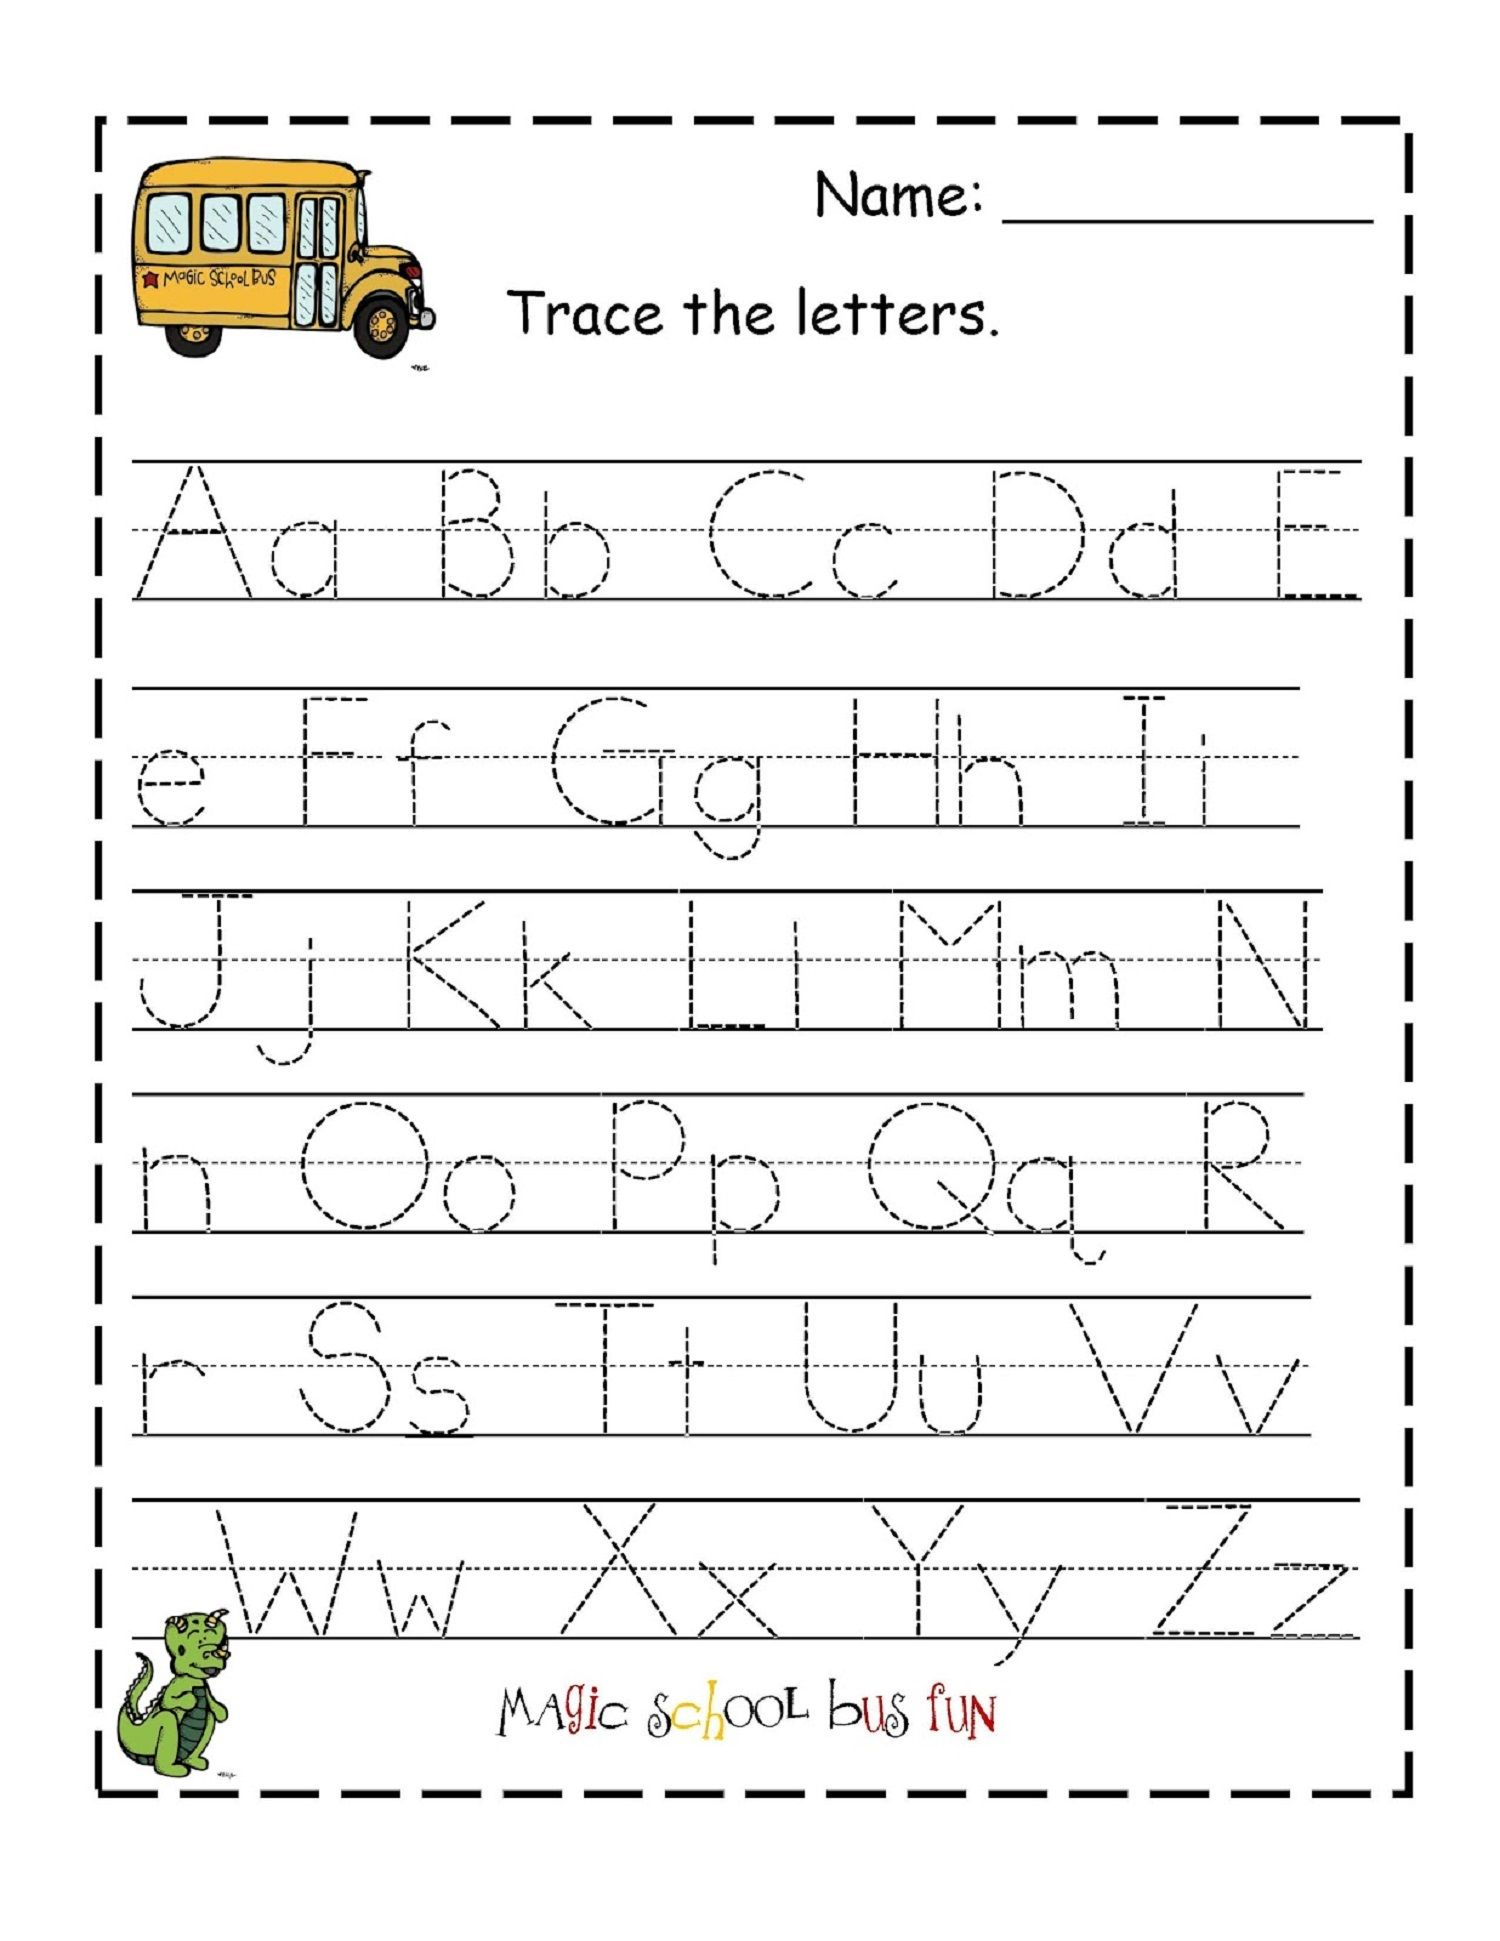 Traceable Alphabet For Learning Exercise | Letter Tracing pertaining to Free Printable Abc Tracing Letters